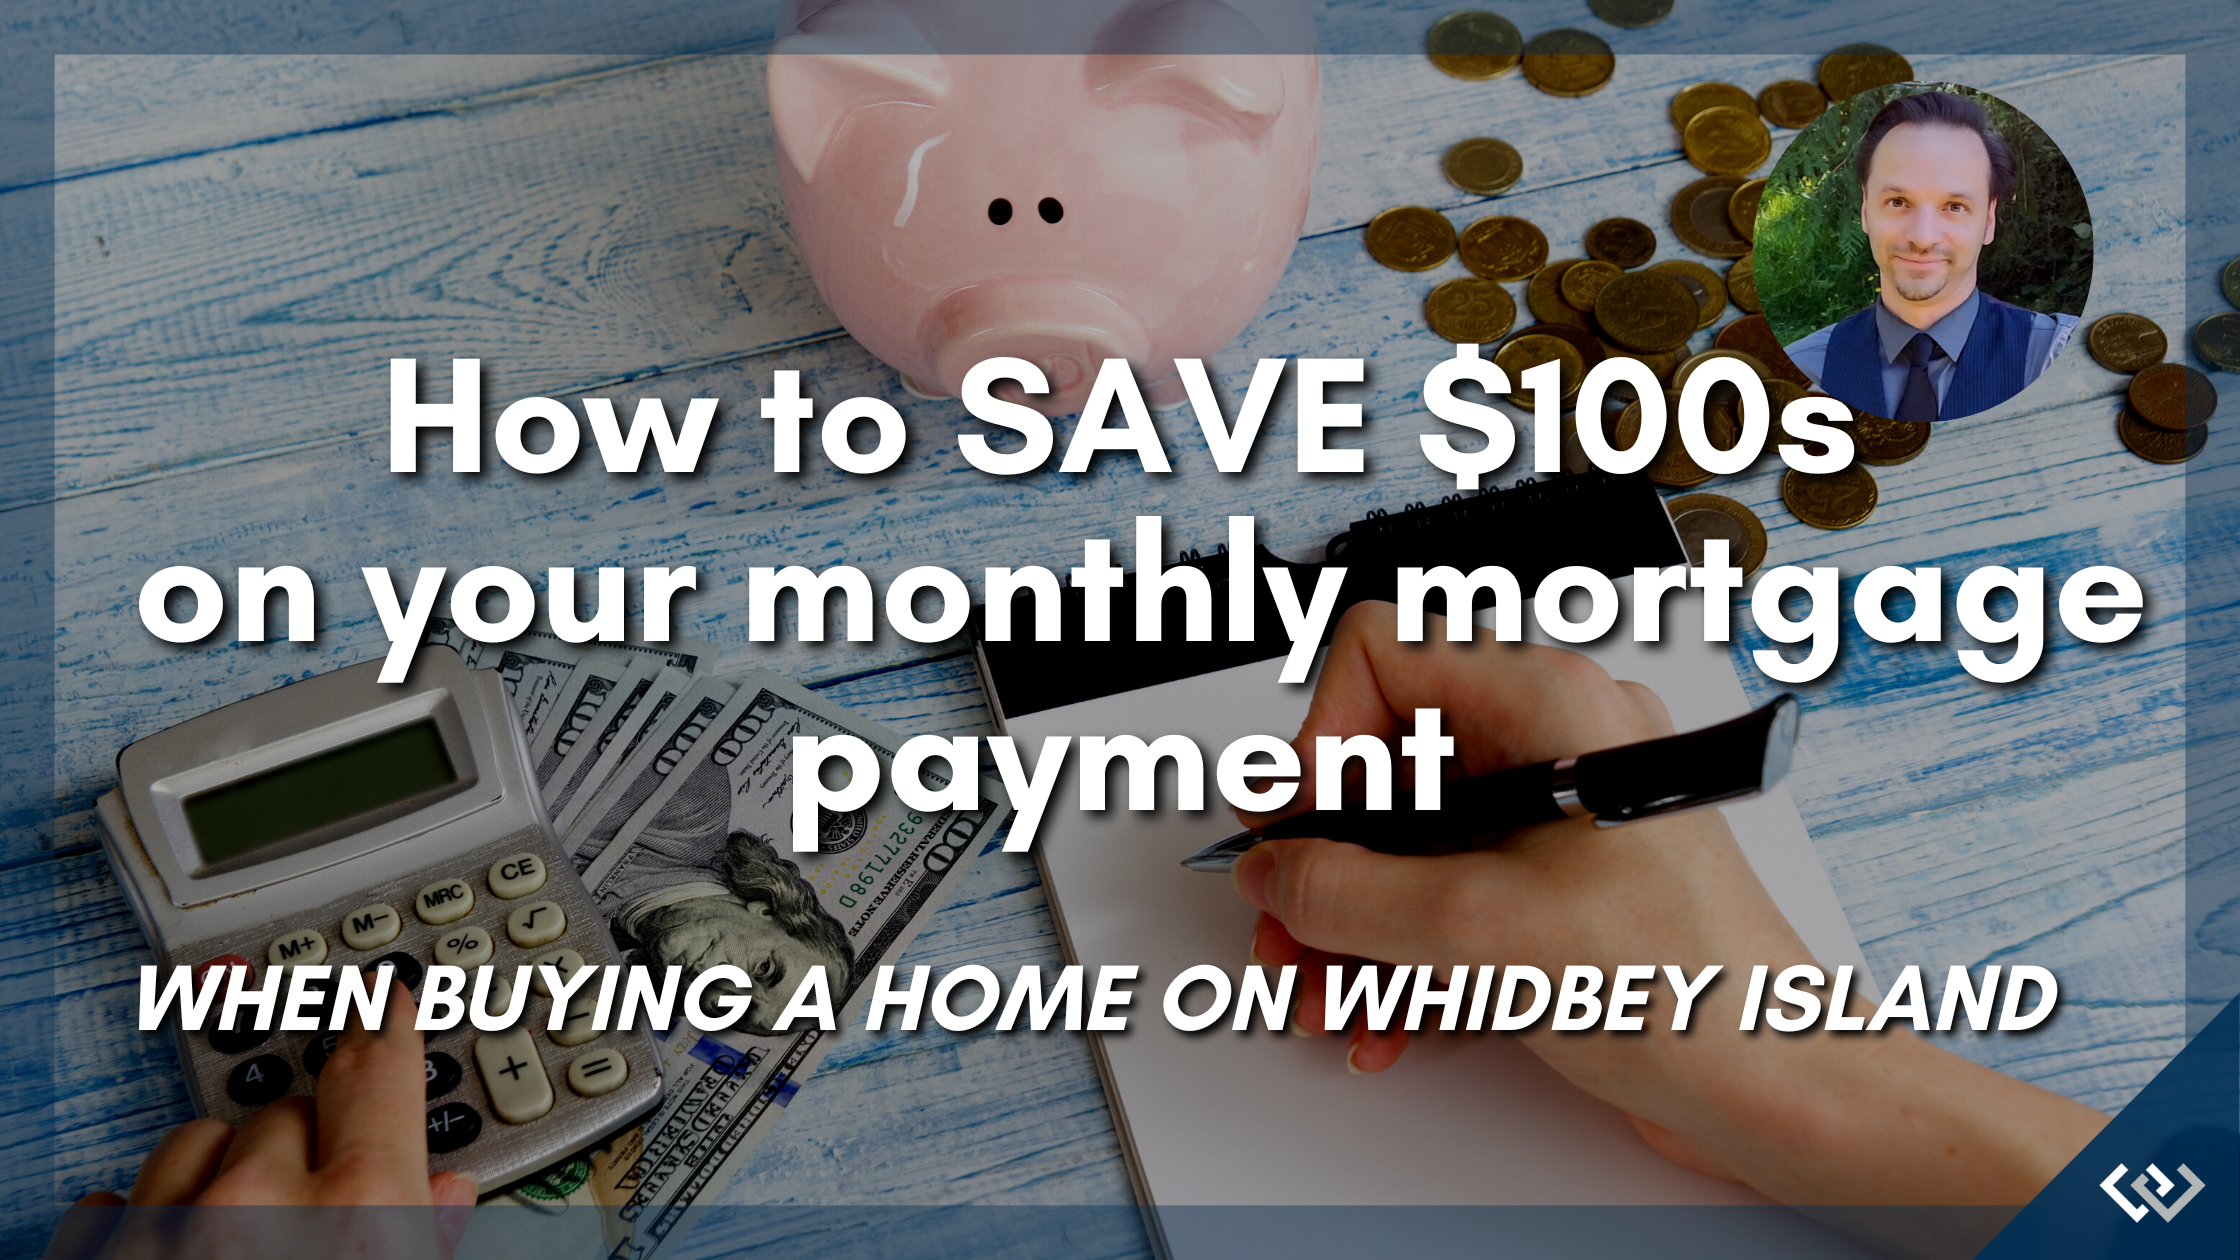 How to save 100s on your monthly mortgage payment - written by Si Fisher